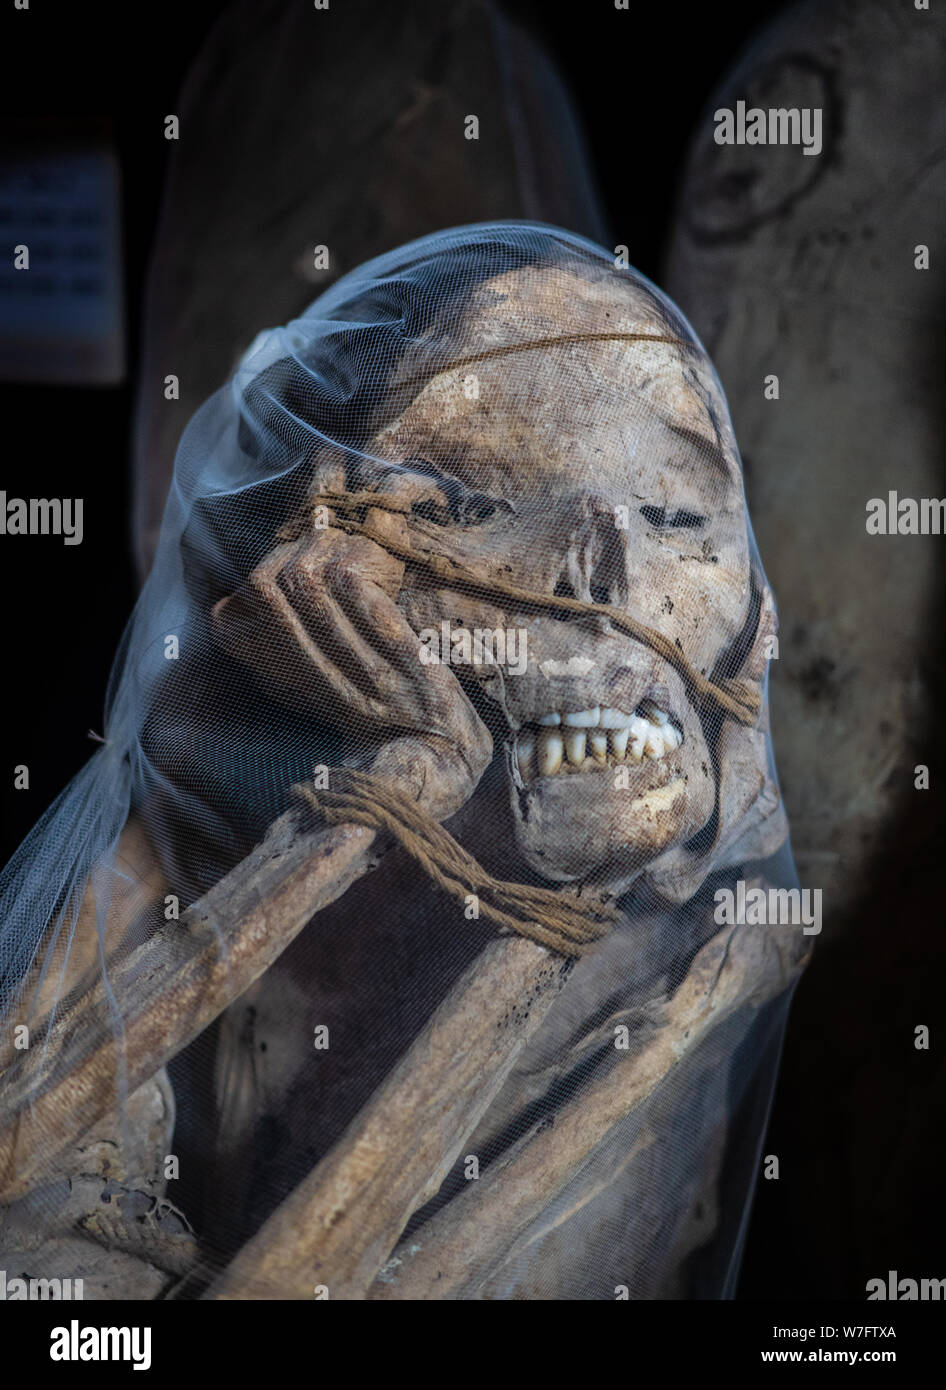 The famous mummies that have been found at tombs near Laguna de los Condores (Lake of the Condors) and can now be seen at Leymebamba museum. Stock Photo